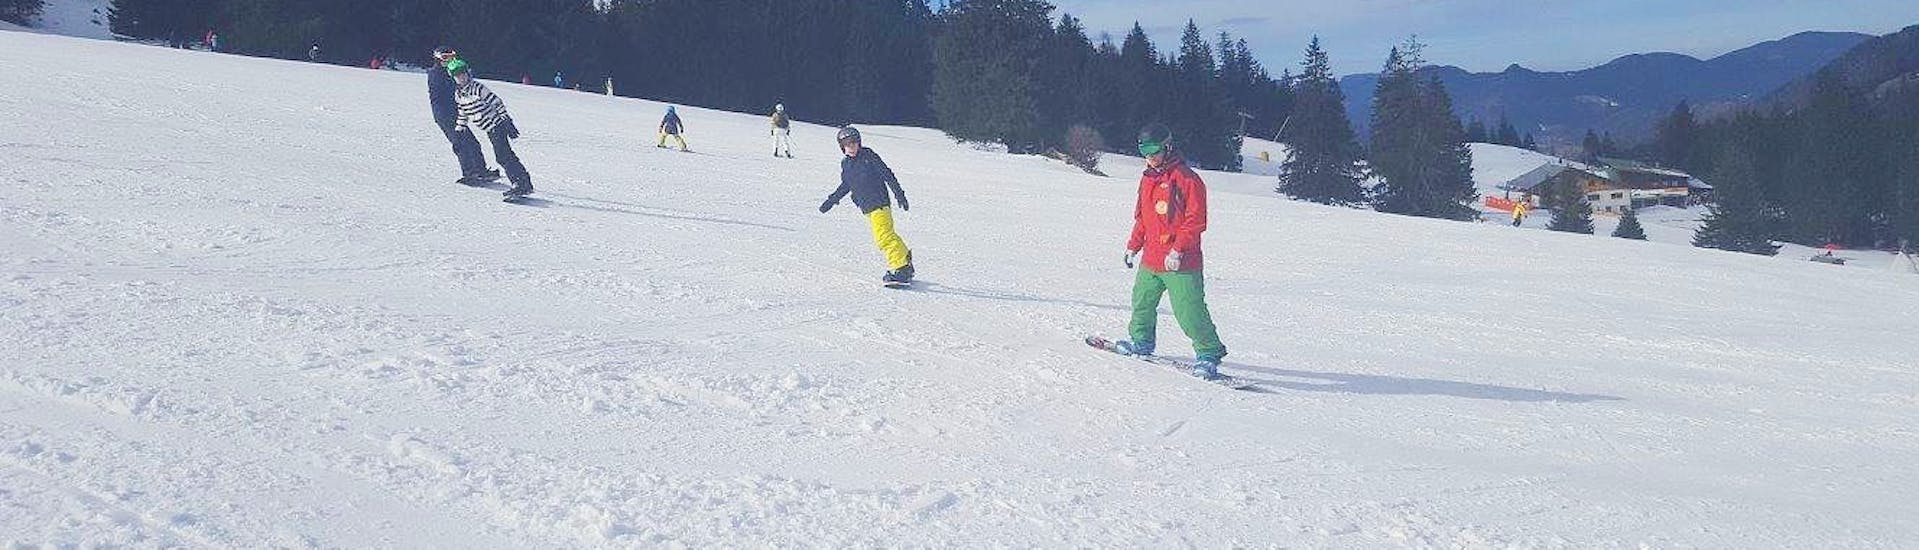 A snowboarder just learnt how to make a turn during kids snowboarding lessons for beginners with Skischule Bayrischzell.